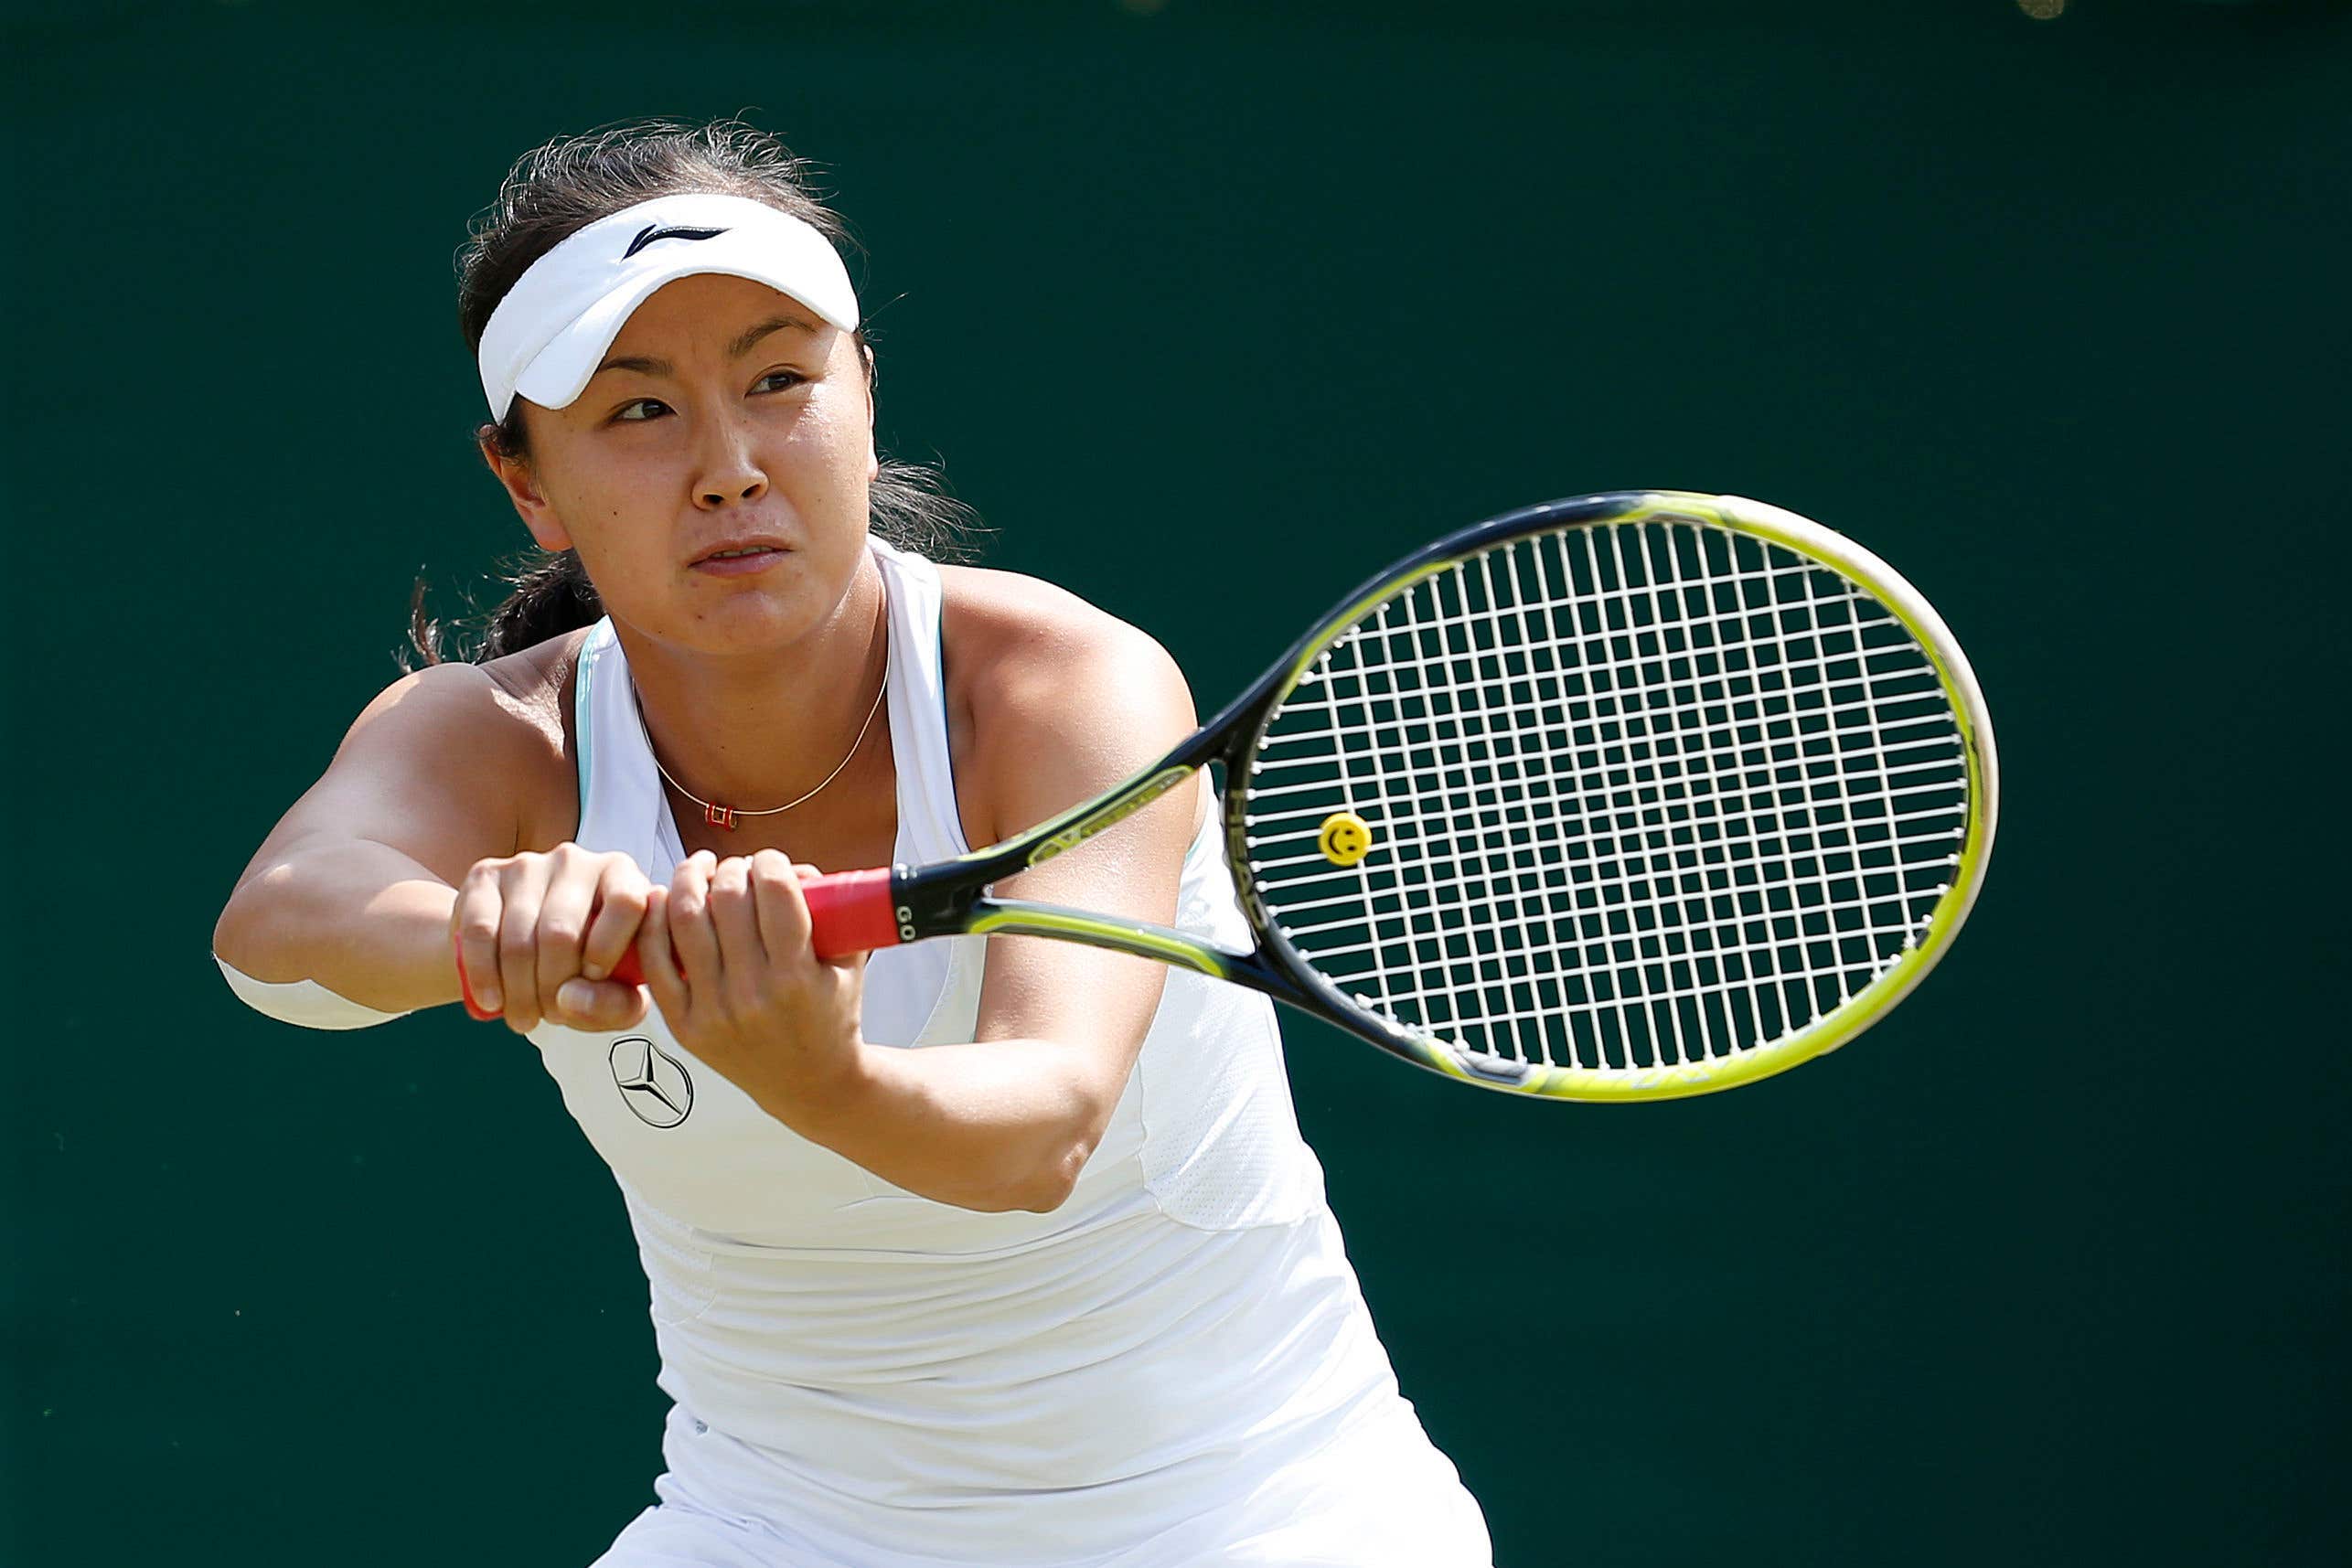 Peng Shuai in action at Wimbledon in 2014 (Anthony Devlin/PA)